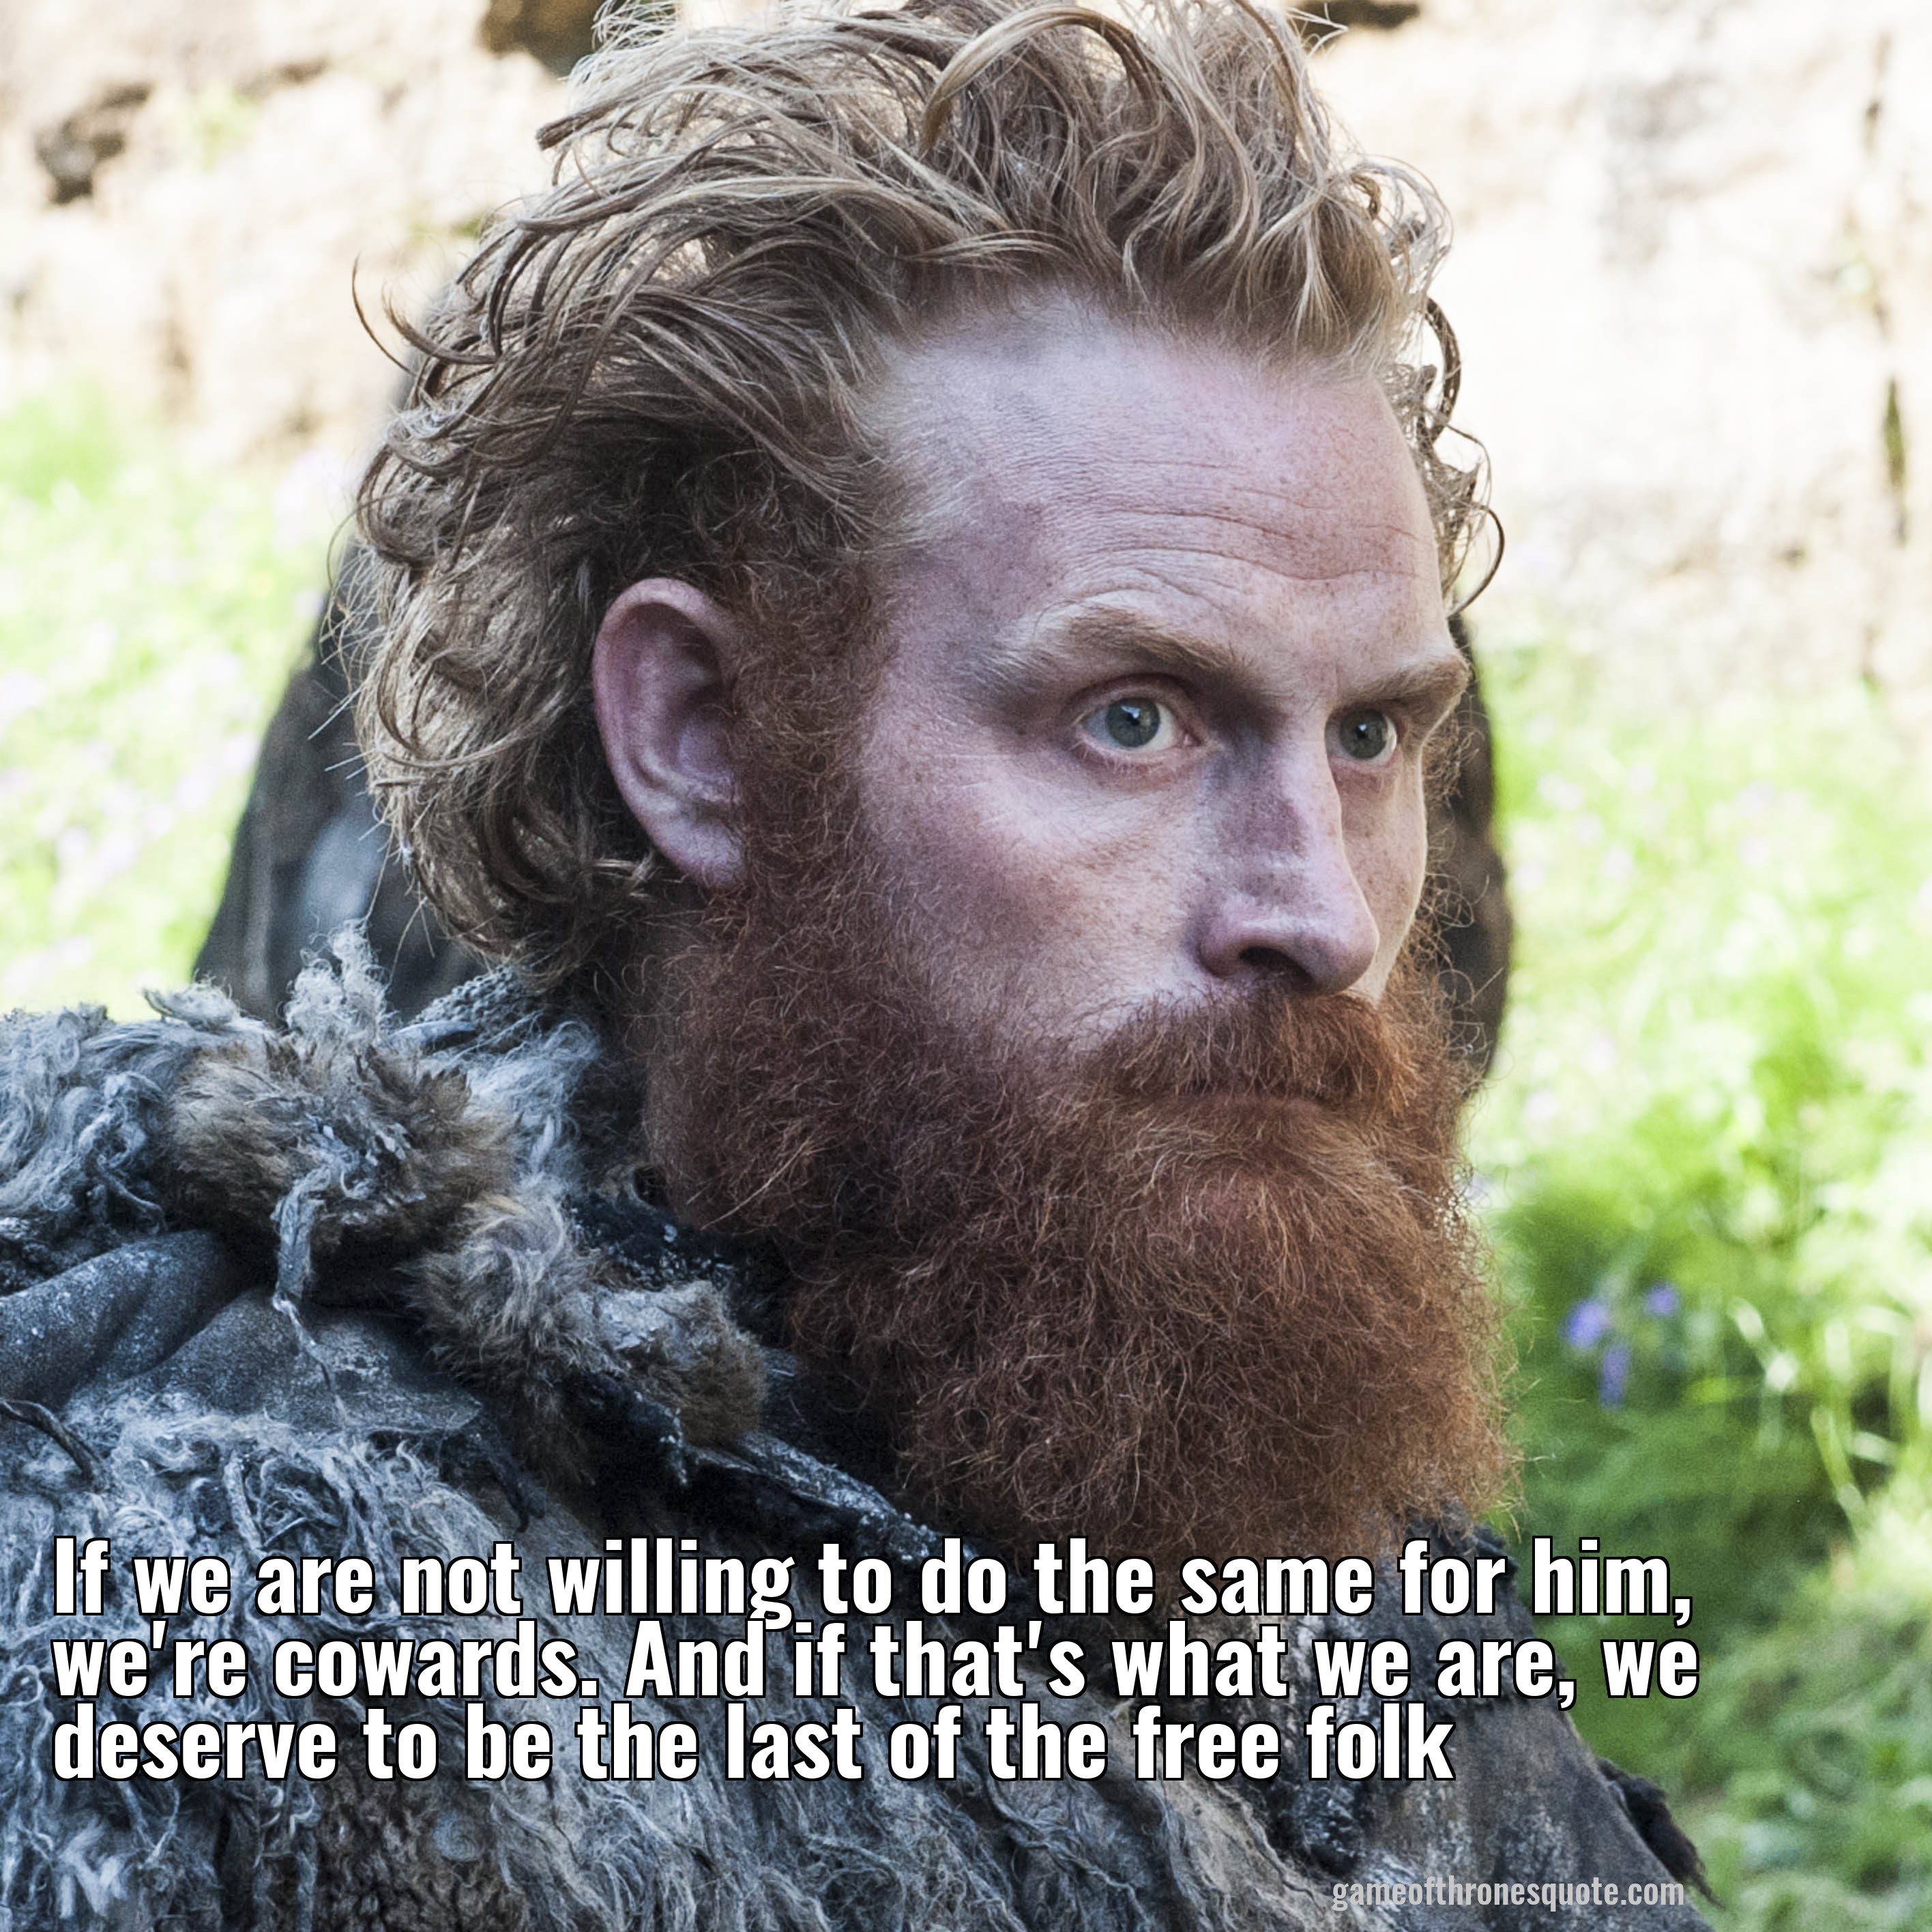 If we are not willing to do the same for him, we're cowards. And if that's what we are, we deserve to be the last of the free folk